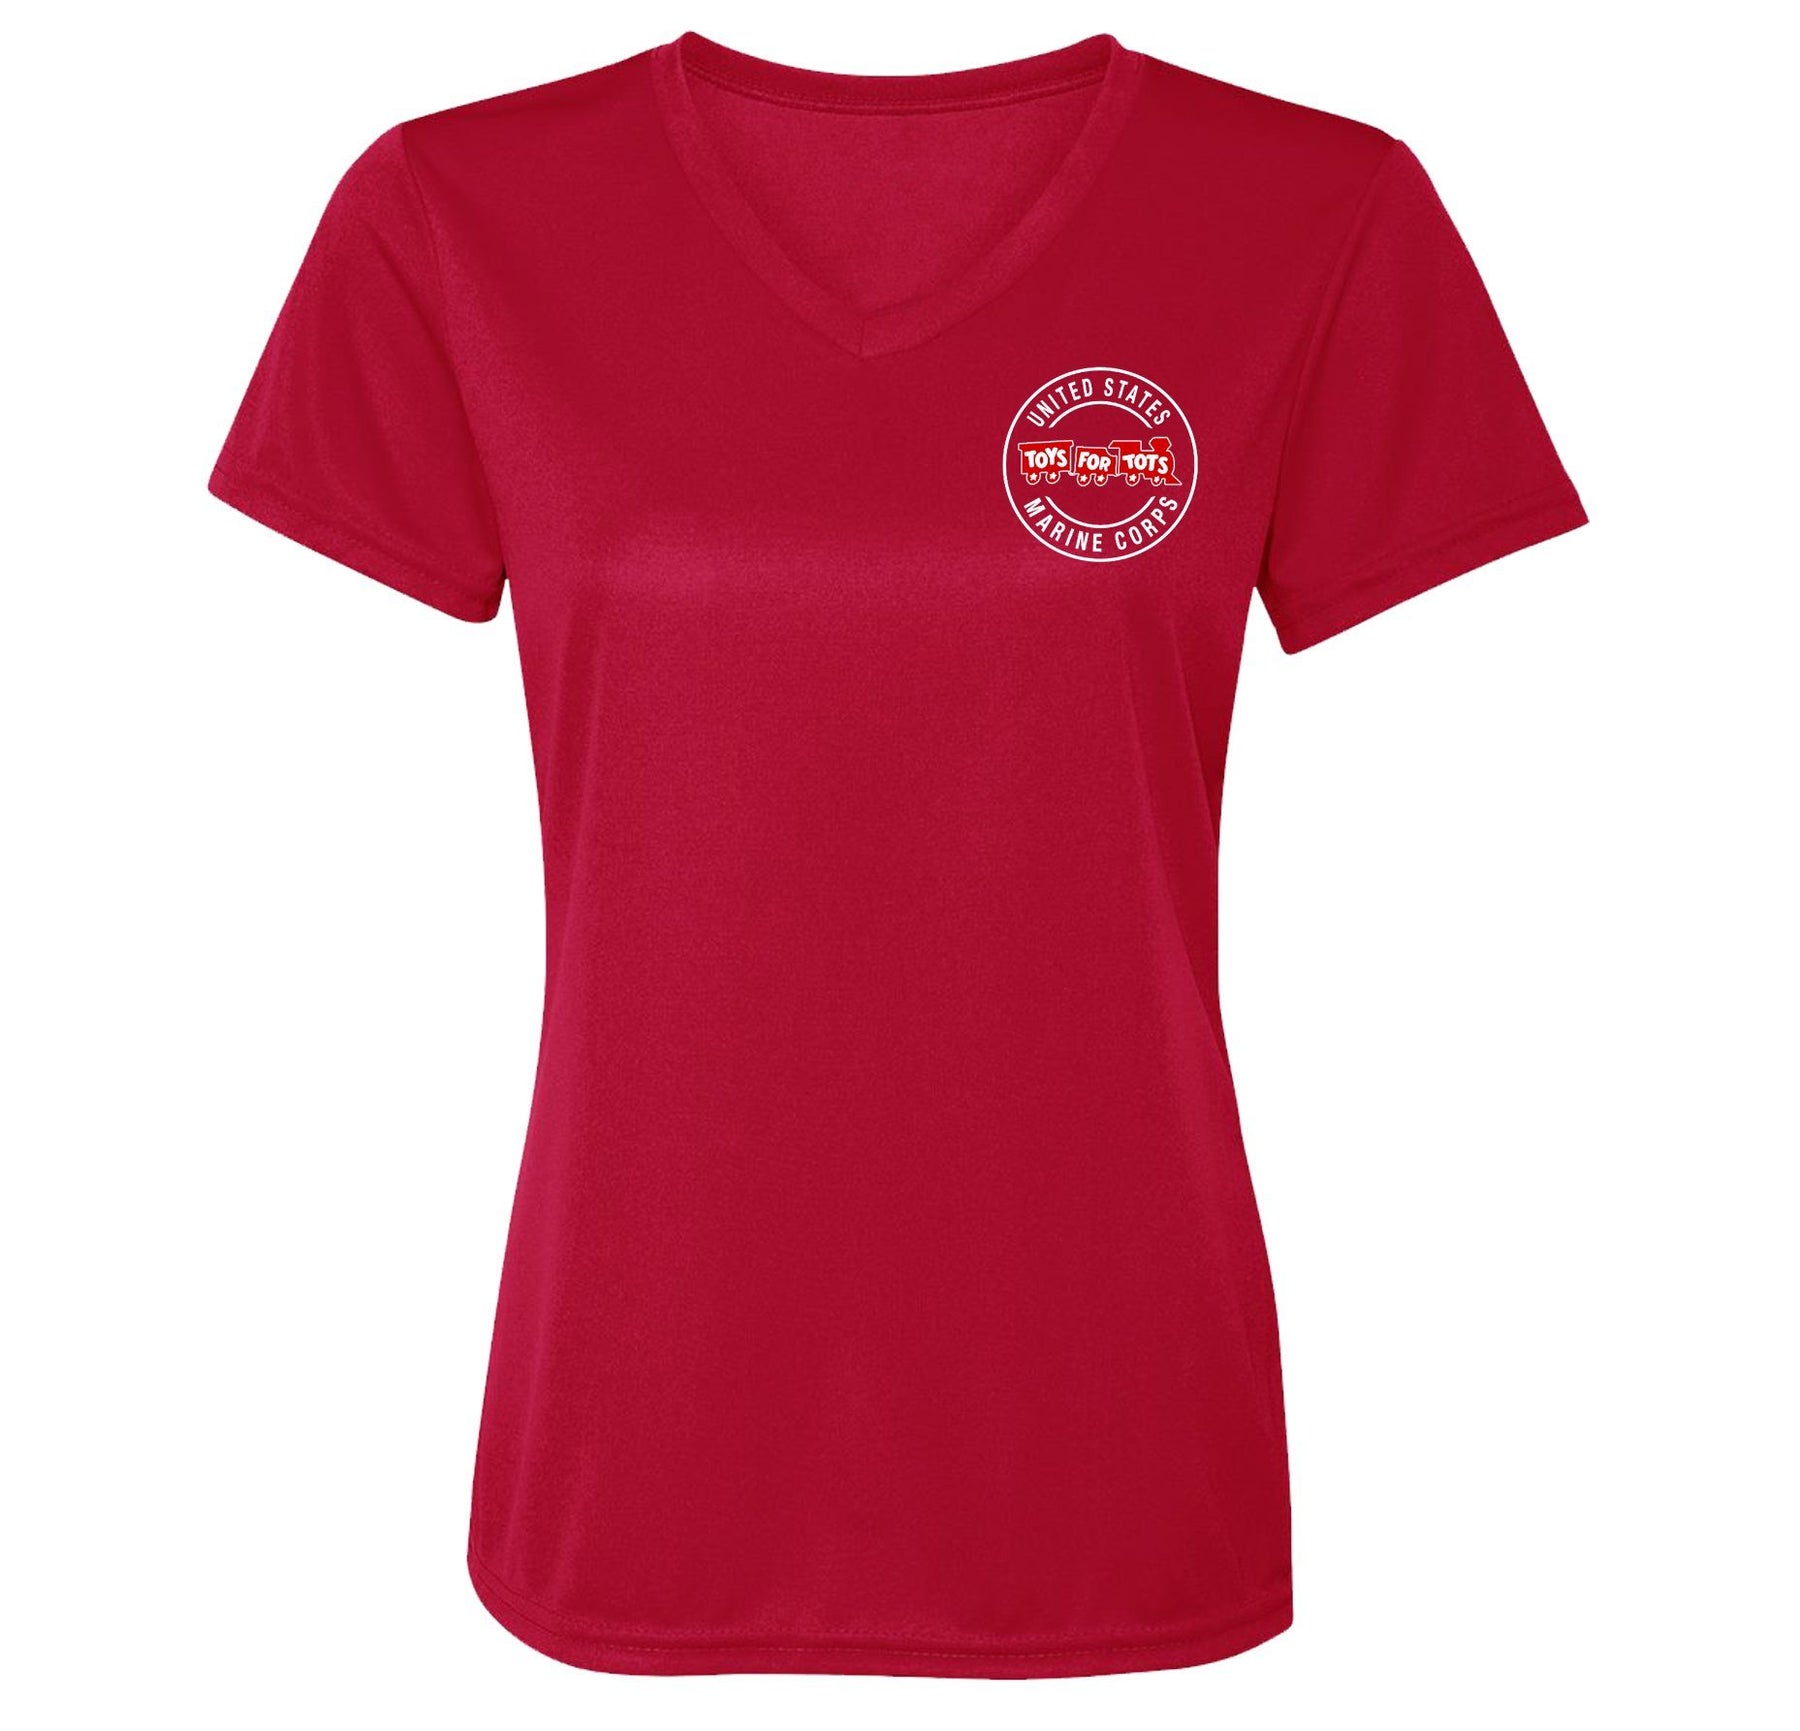 Augusta Dri-Fit Performance Circle TFT Chest Seal Women's V-Neck T-Shirt TFT Shirt Marine Corps Direct S RED 